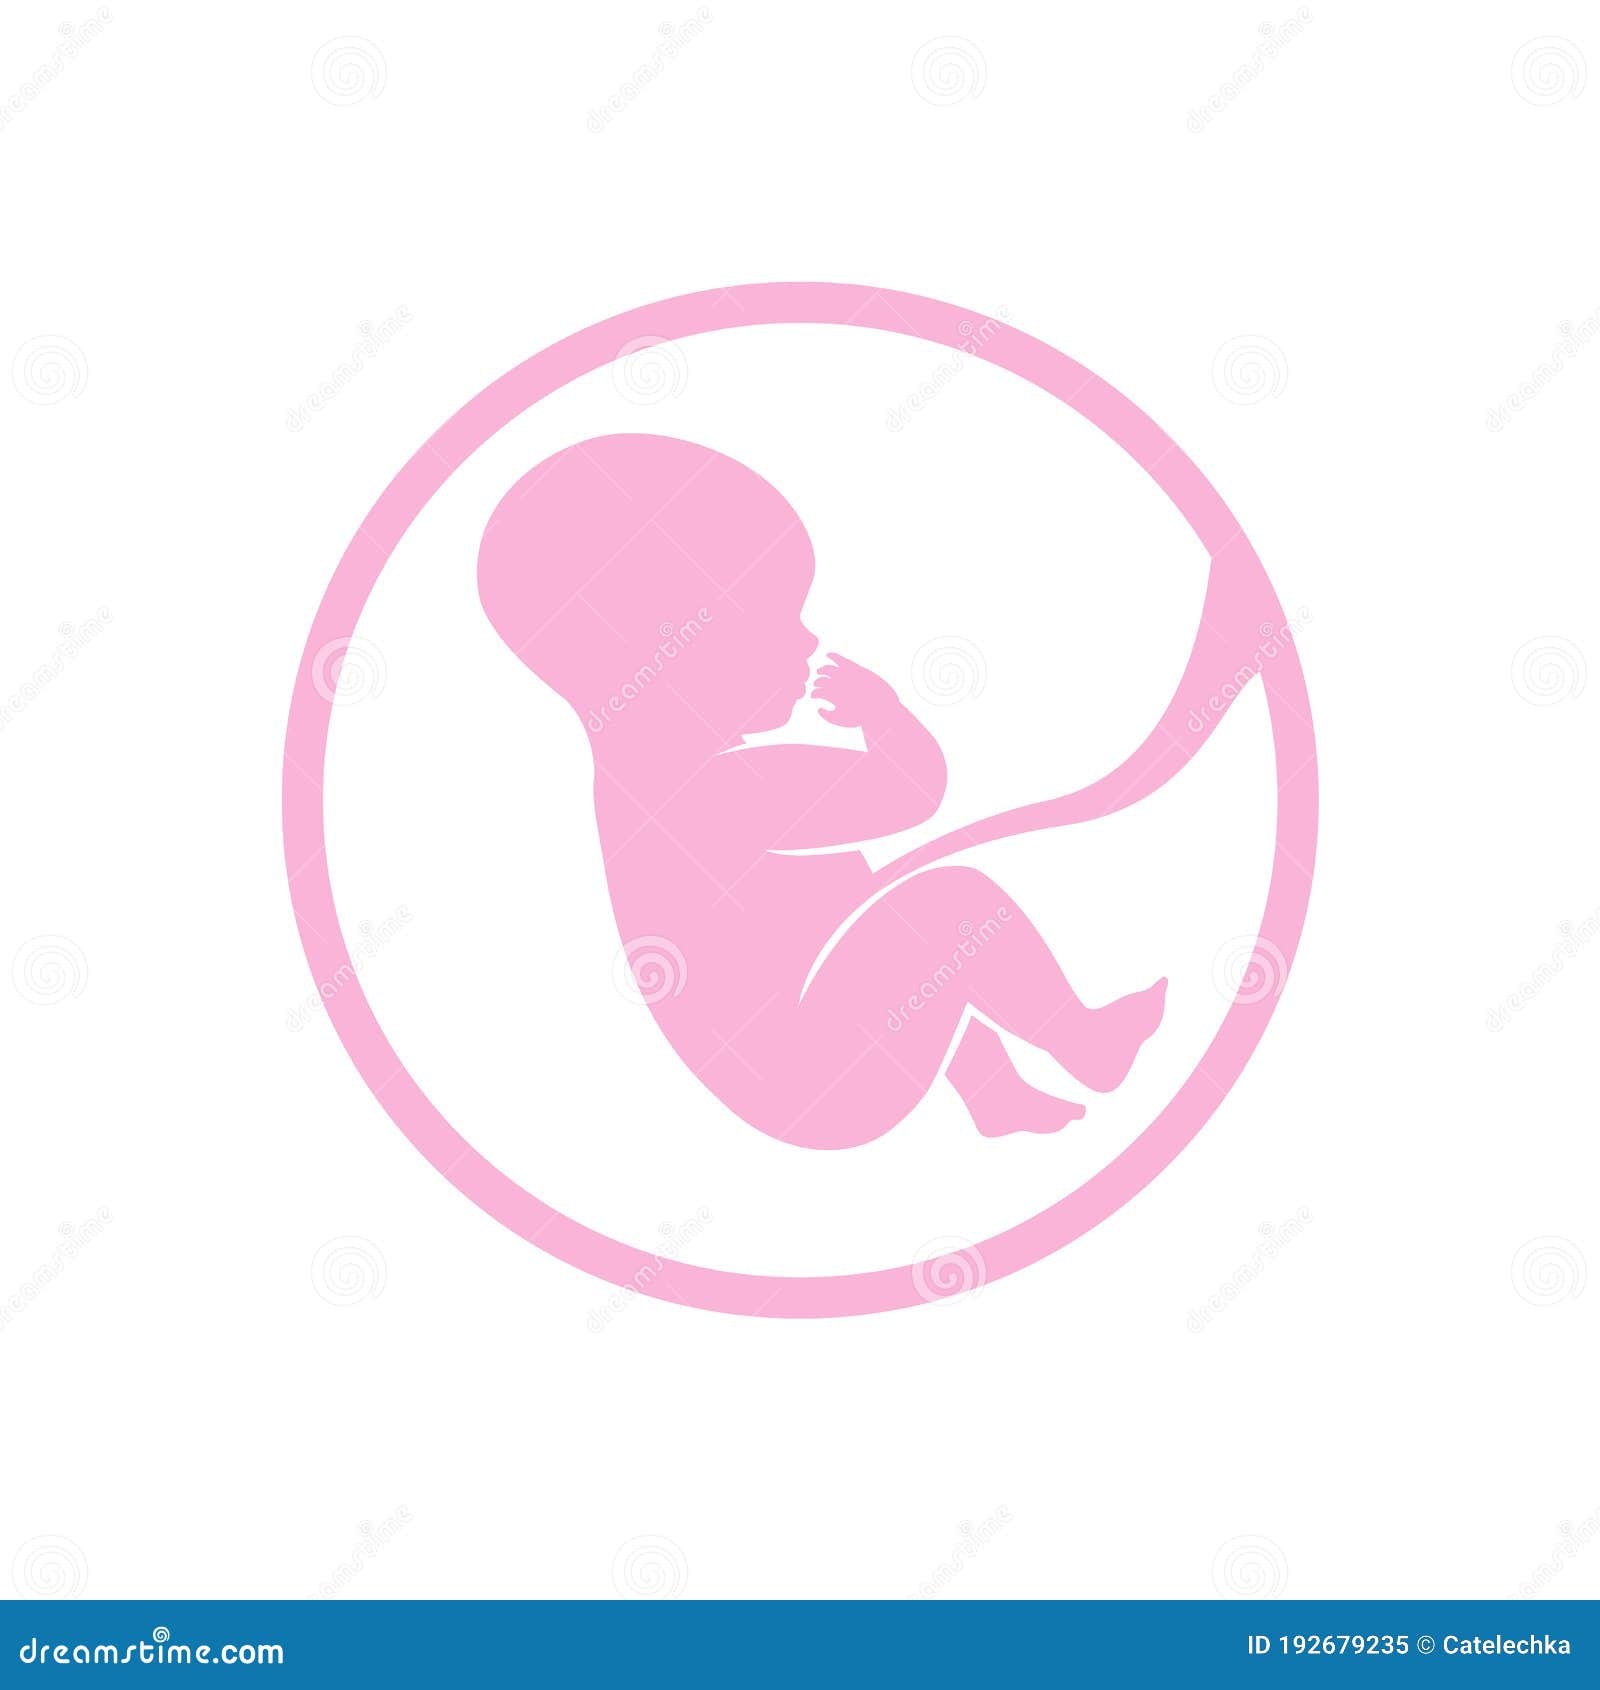 fetus icon in a pink baby color. embryol logo.